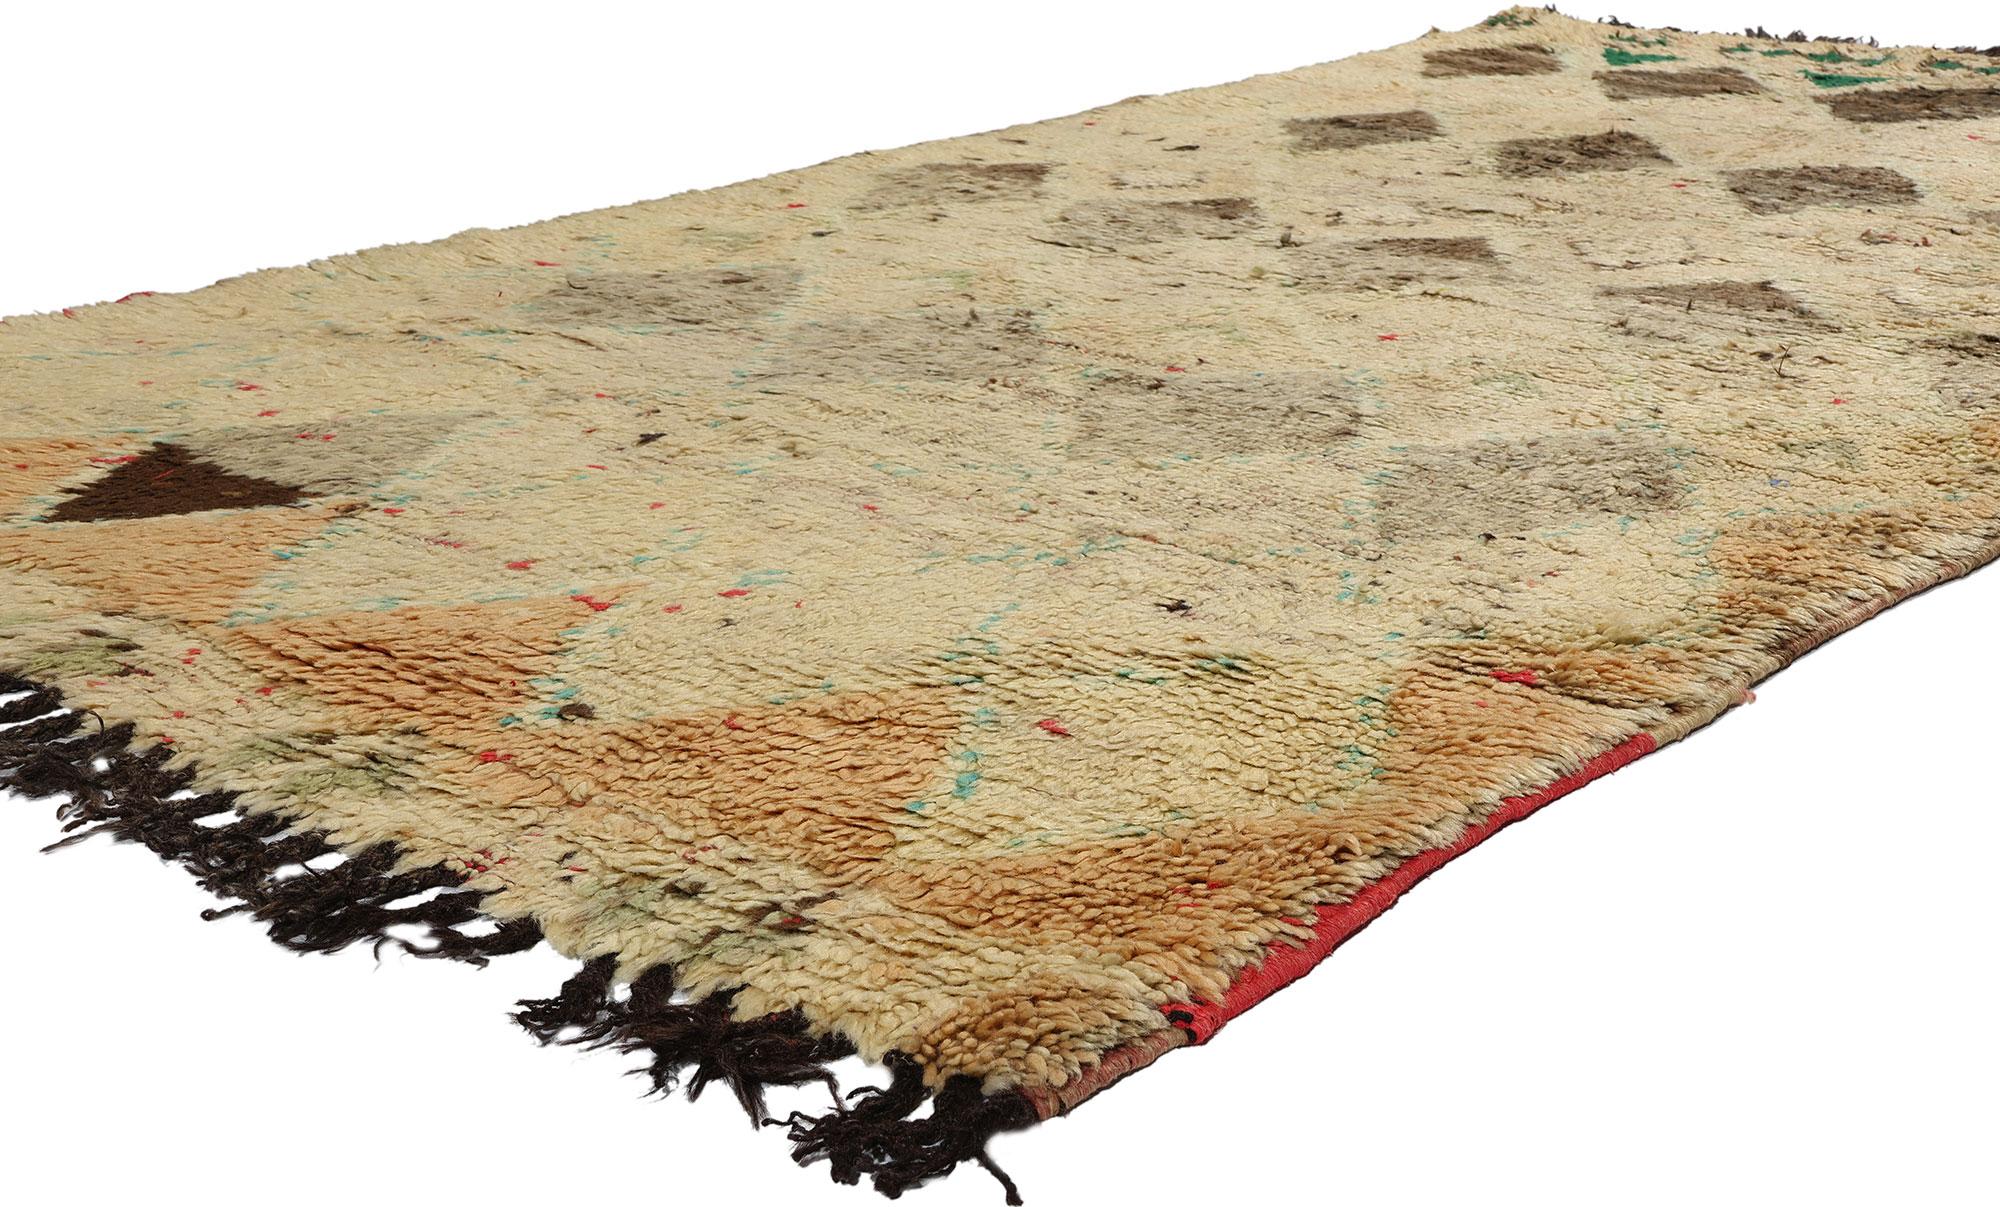 21729 Vintage Boujad Moroccan Rug, 04'08 x 08'08. ​Originating from Morocco's Boujad region, Boujad rugs transcend their utilitarian function to become exquisite handwoven masterpieces that embody the vibrant artistic legacy of Berber tribes,